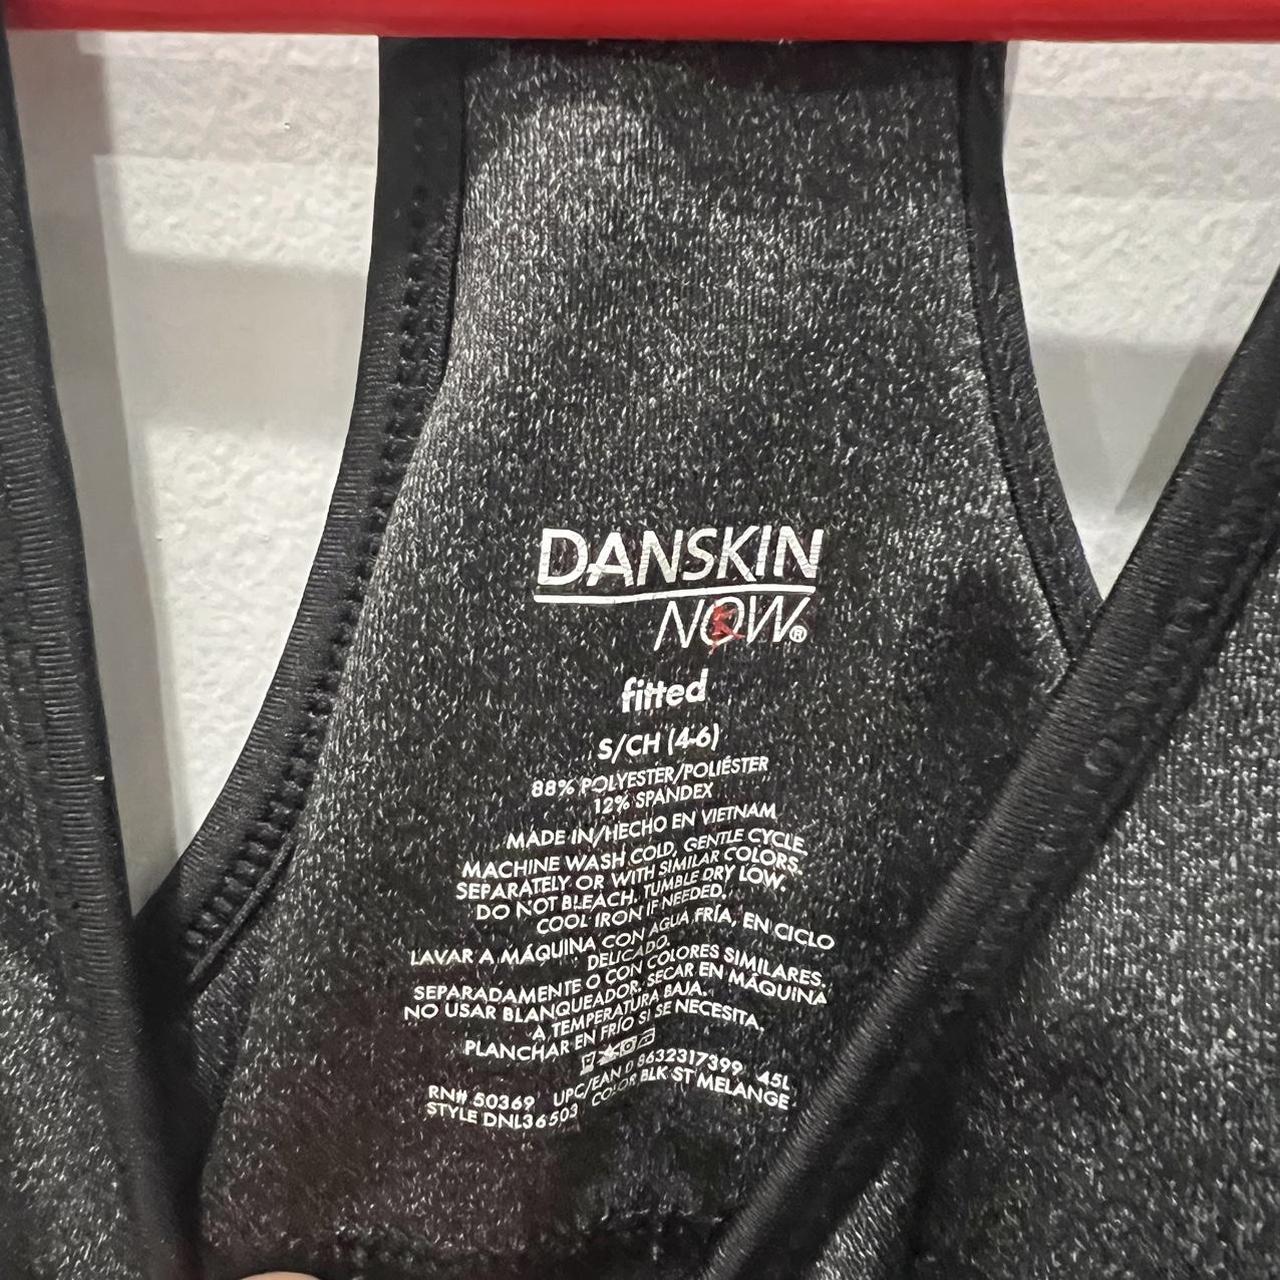 [FREEBIES INCLUDED] Danskin Now size Small fitted